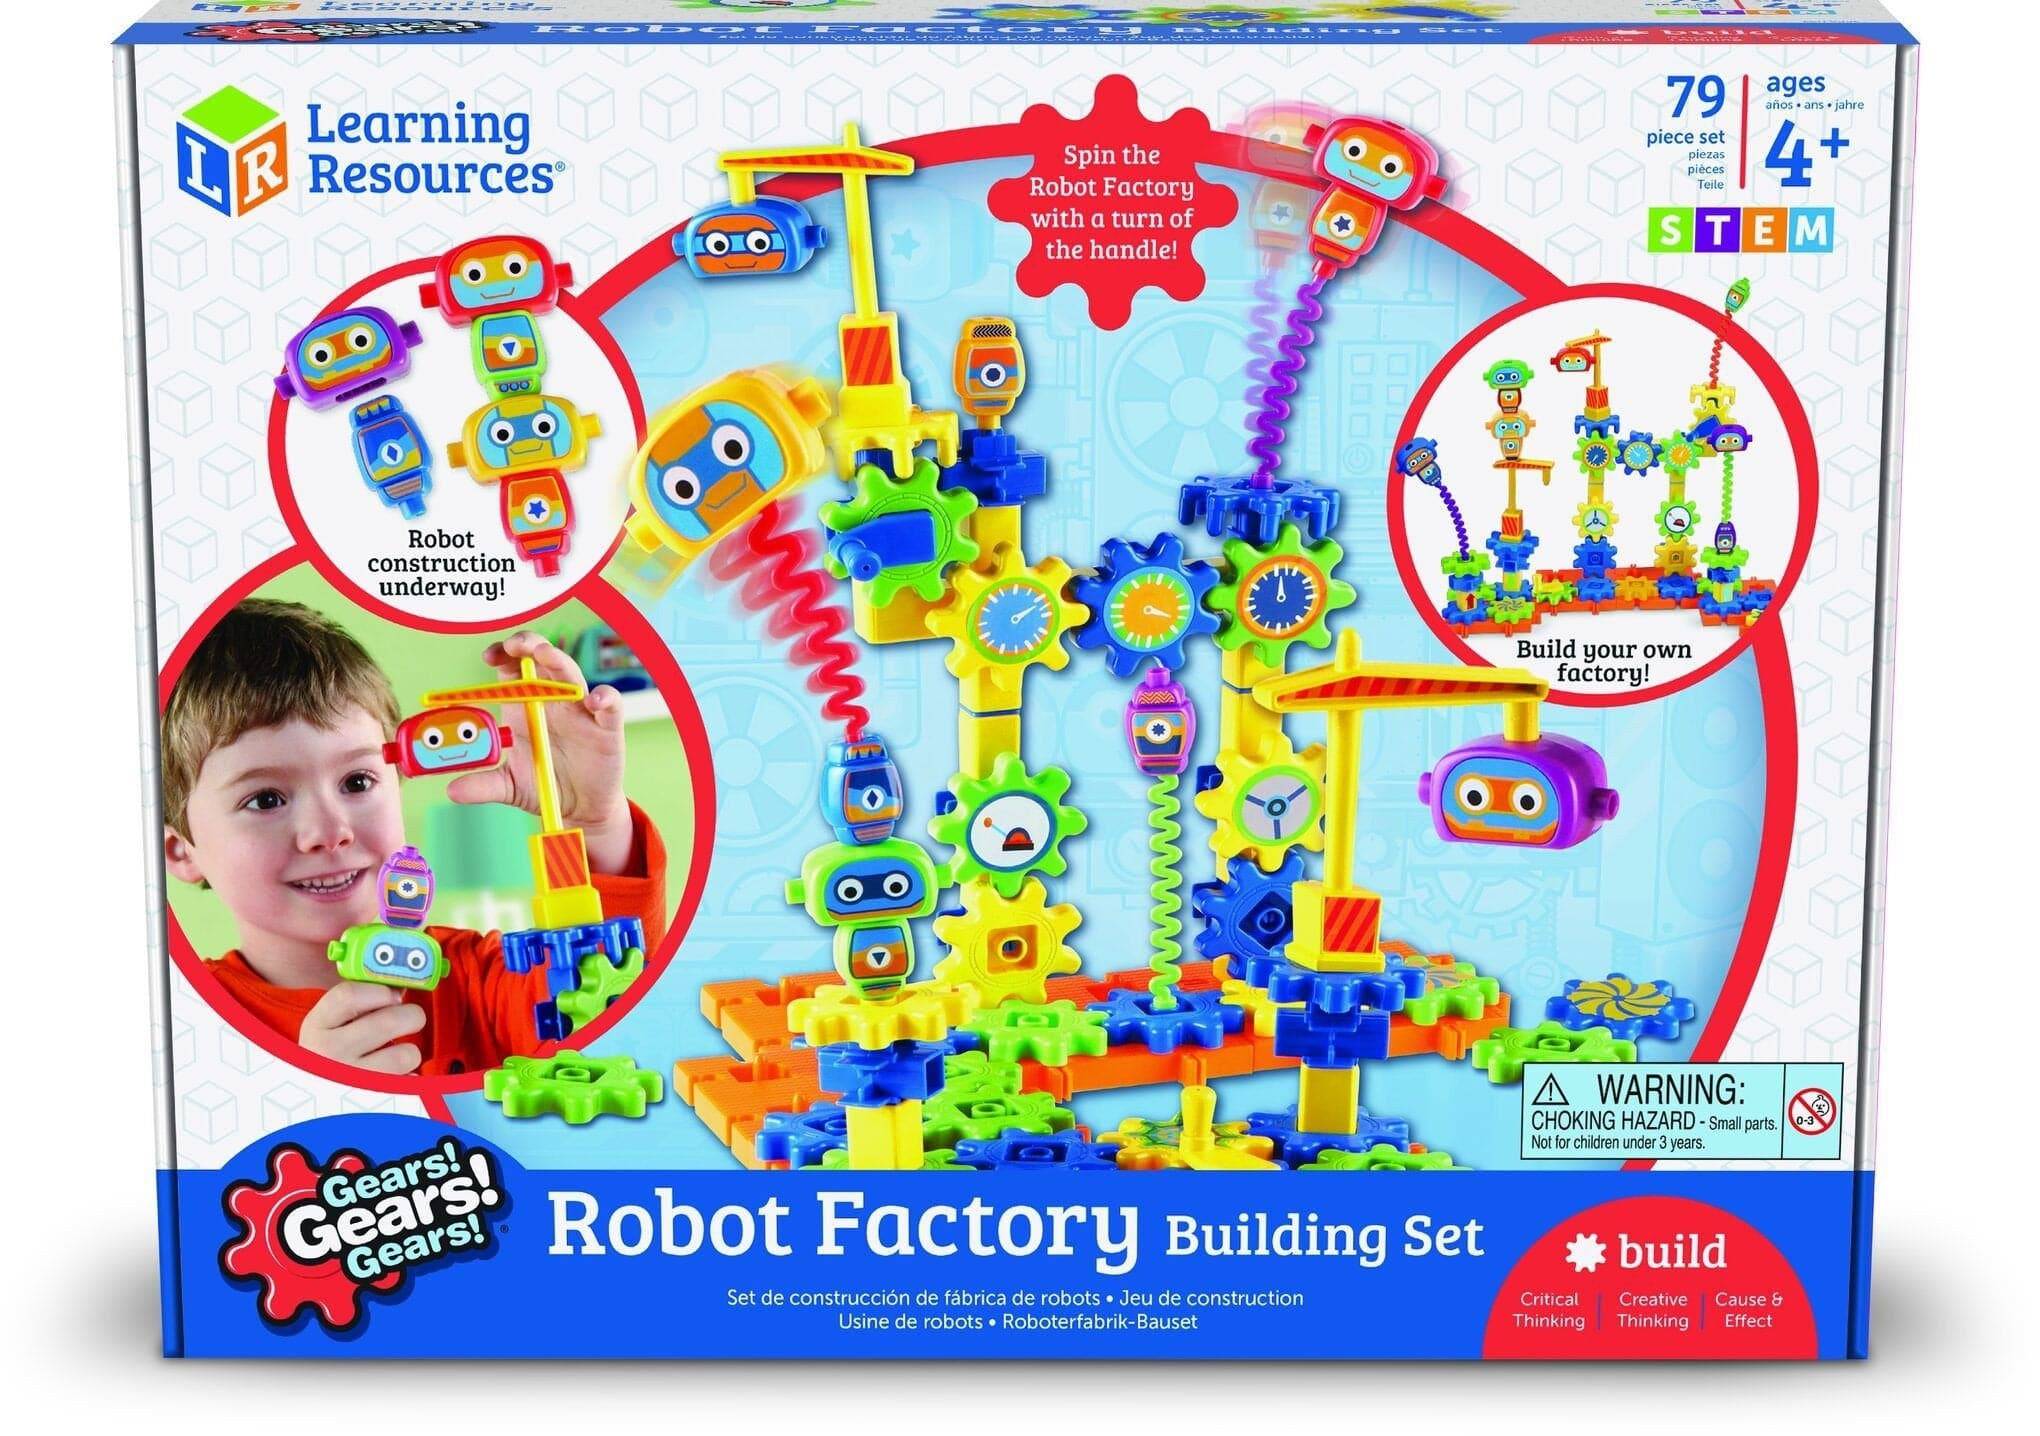 Gears!Gears!Gears! Robot Factory Building Set - Albagame